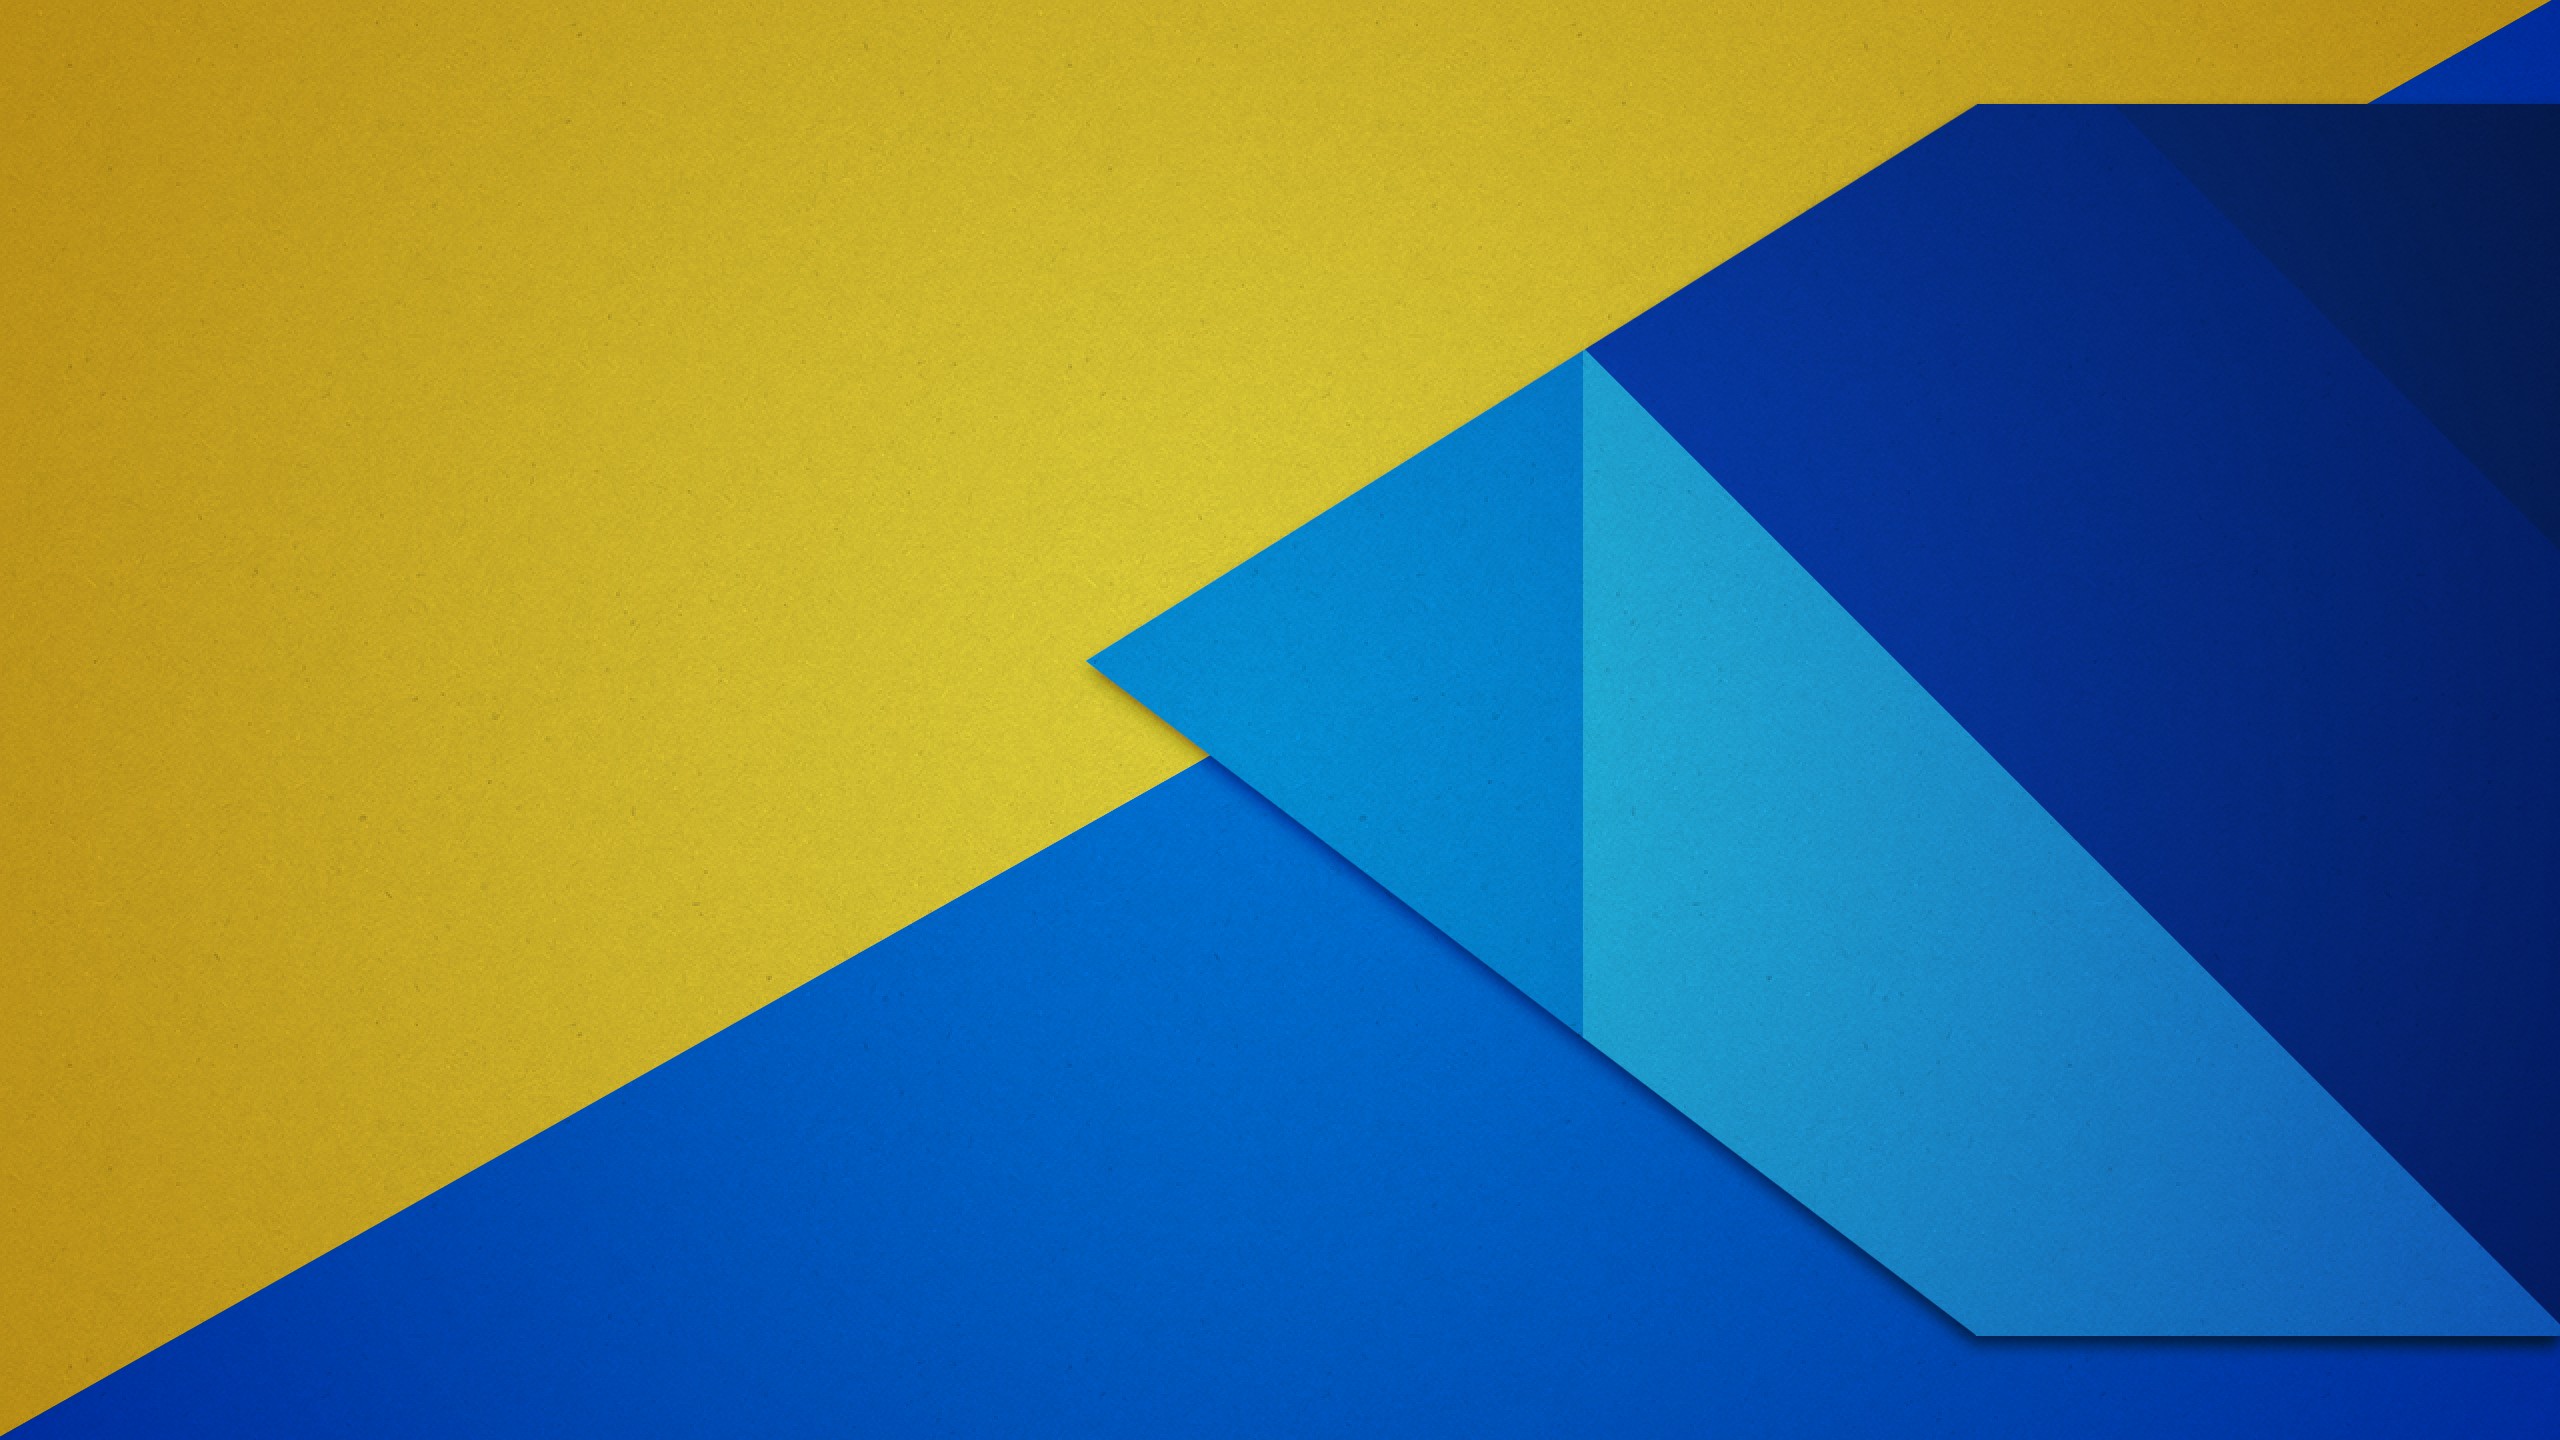 android marshmallow wallpaper 1080p,blue,yellow,cobalt blue,azure,turquoise